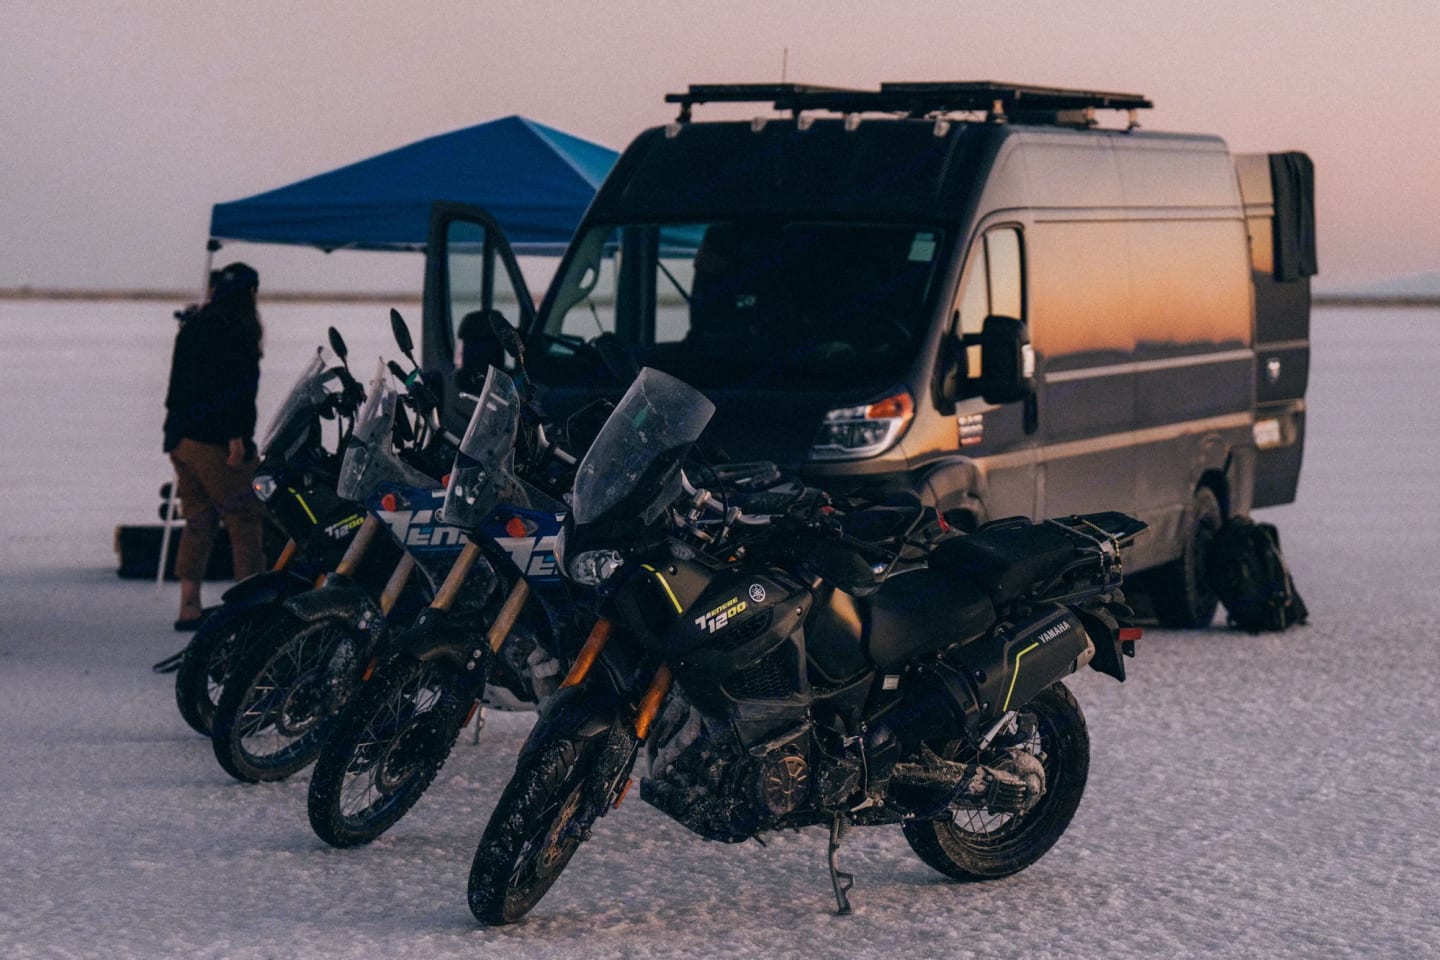 Adventure motorcycles parked on a flat, expansive salt flat at dusk, with a camper van and a blue canopy in the background, conveying a sense of exploration and travel.